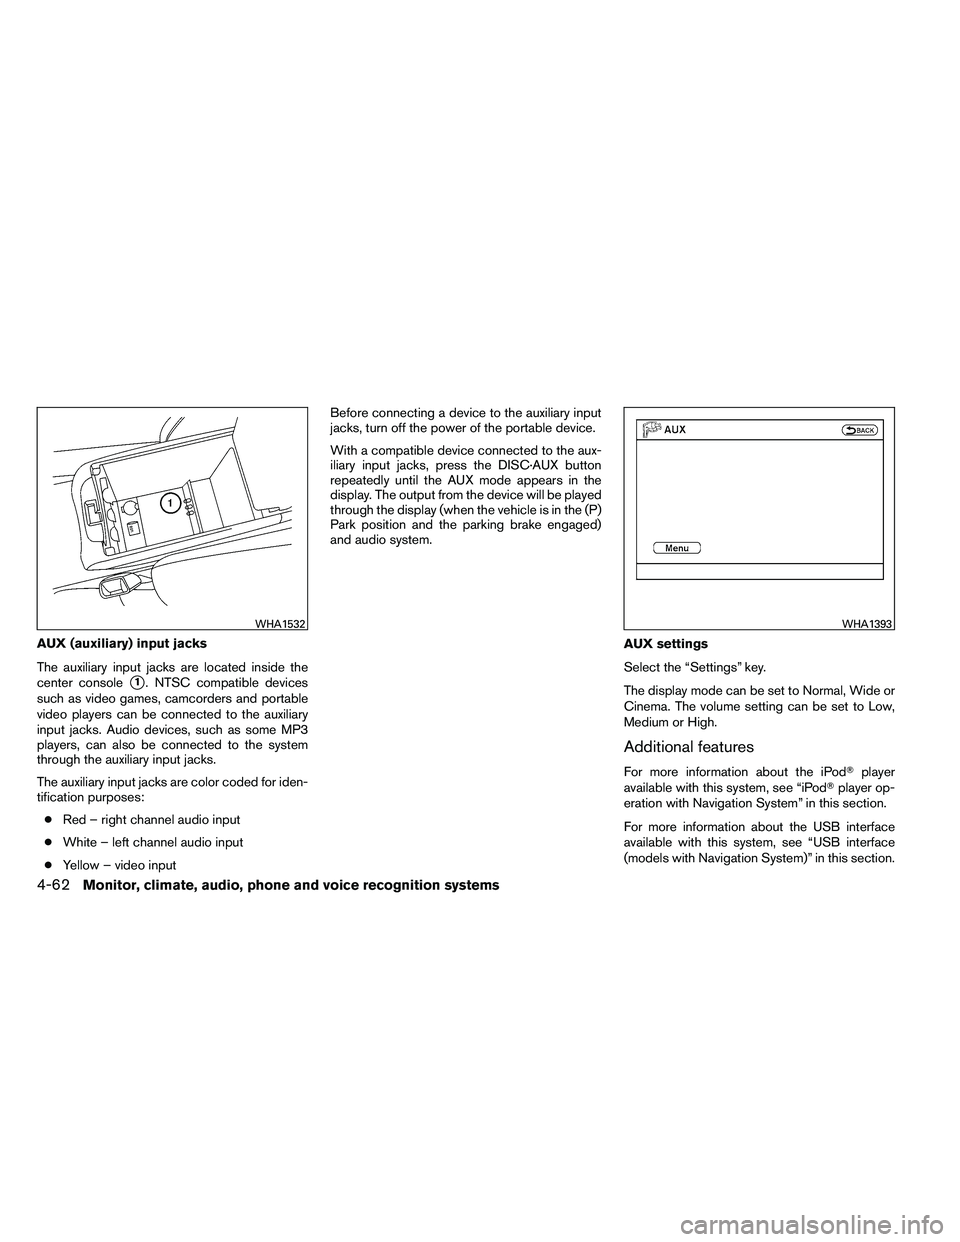 NISSAN ALTIMA 2012  Owners Manual AUX (auxiliary) input jacks
The auxiliary input jacks are located inside the
center console
1. NTSC compatible devices
such as video games, camcorders and portable
video players can be connected to t